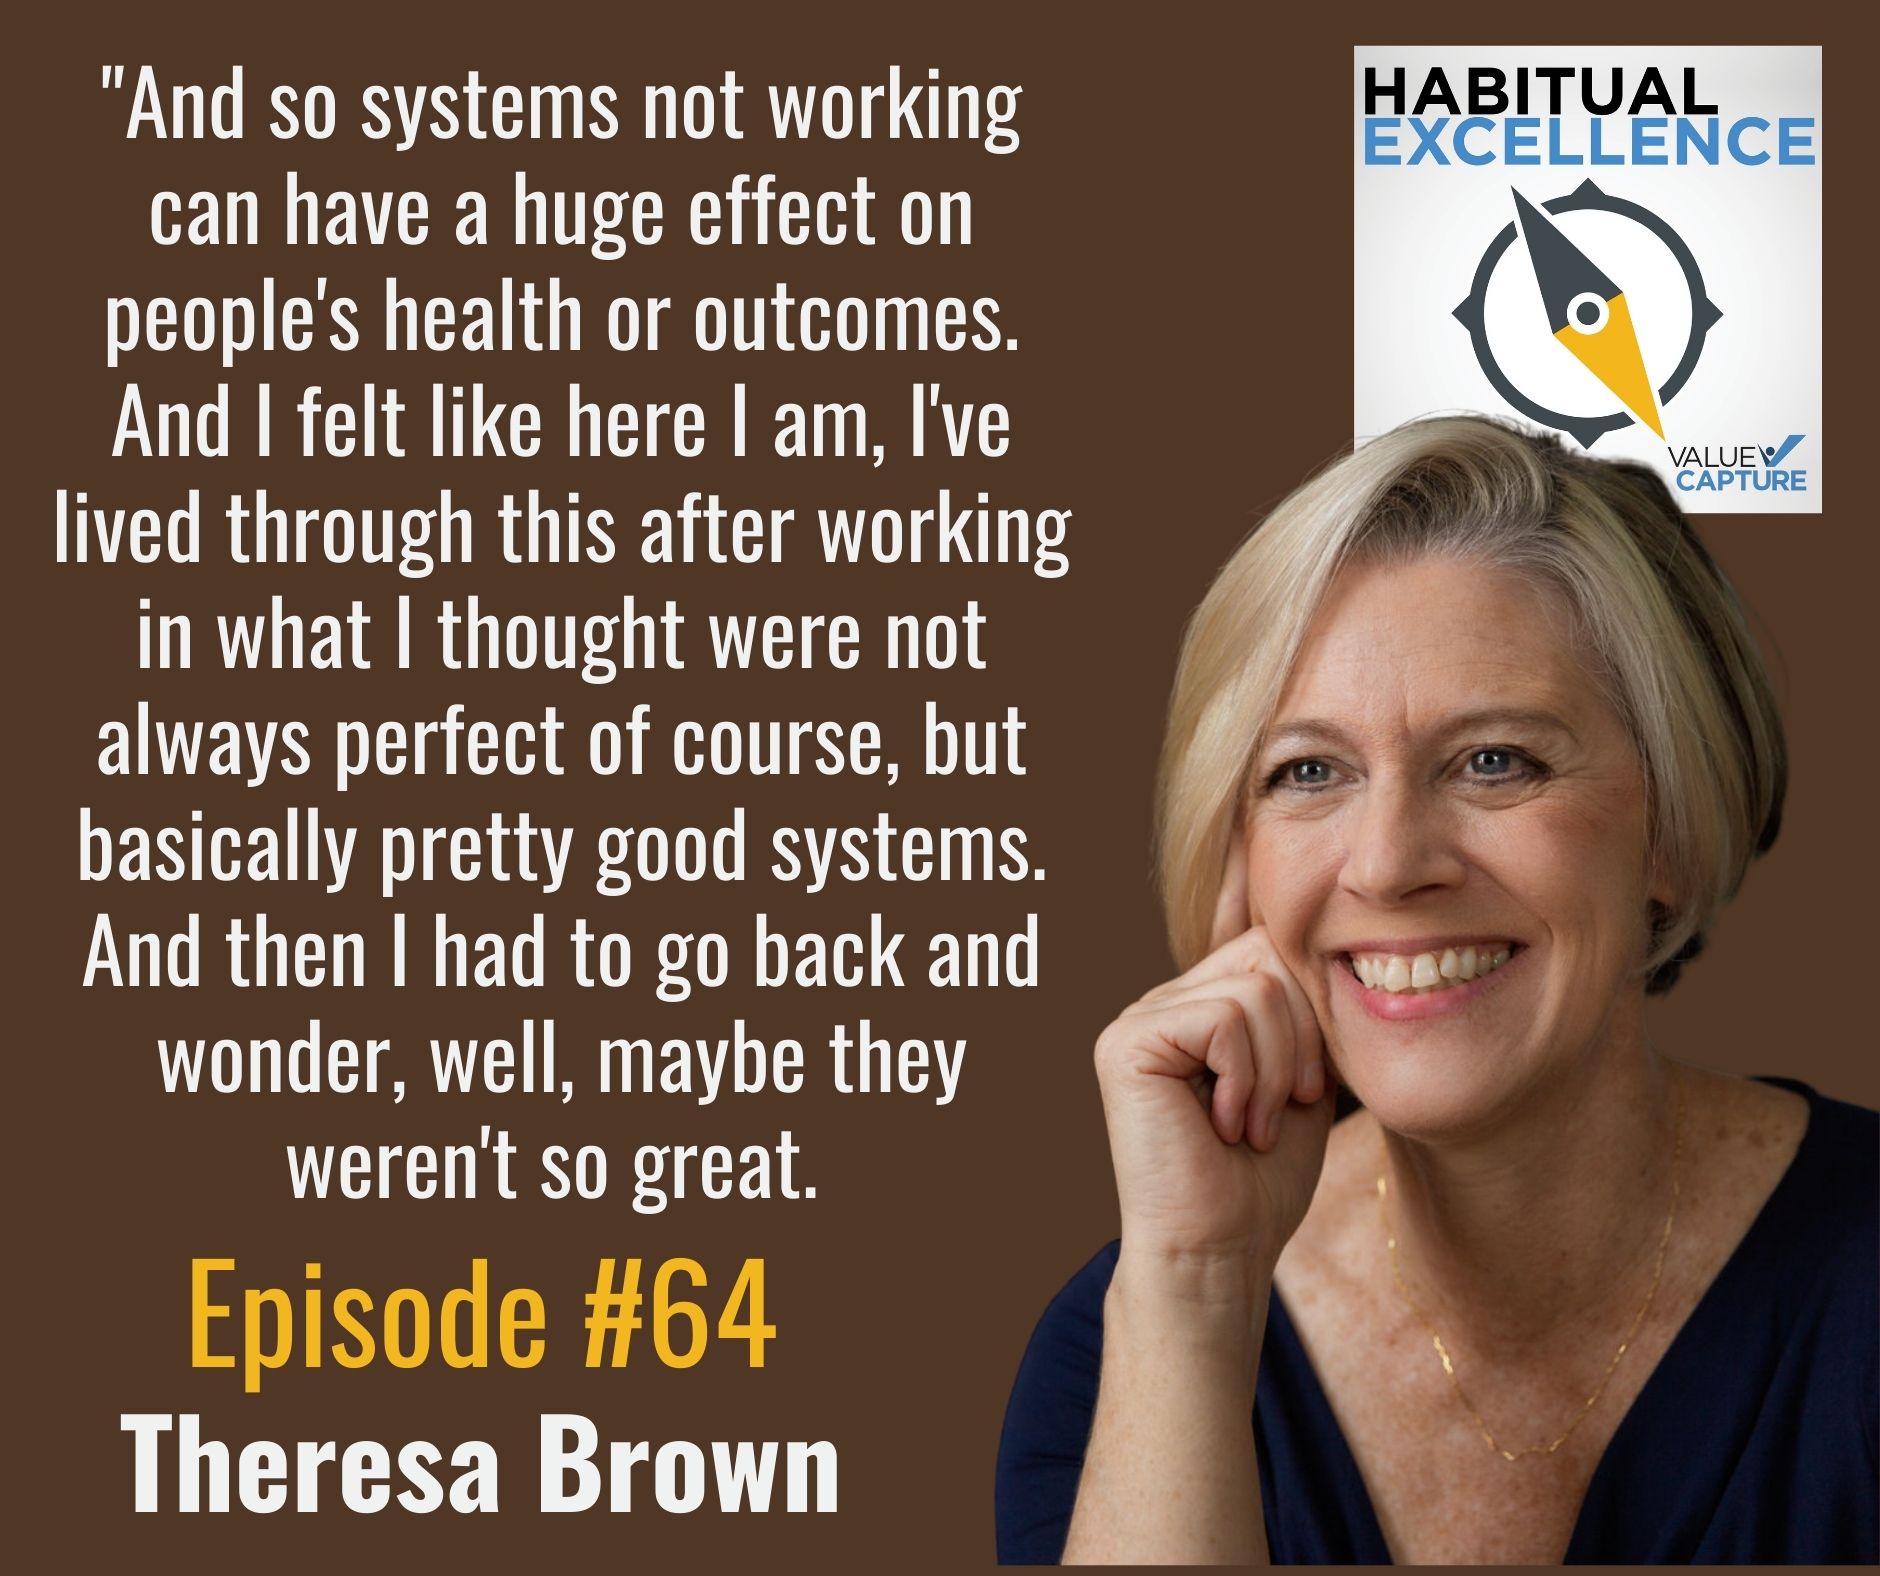 "And so systems not working can have a huge effect on people's health or outcomes. And I felt like here I am, I've lived through this after working in what I thought were not always perfect of course, but basically pretty good systems. And then I had to go back and wonder, well, maybe they weren't so great. 